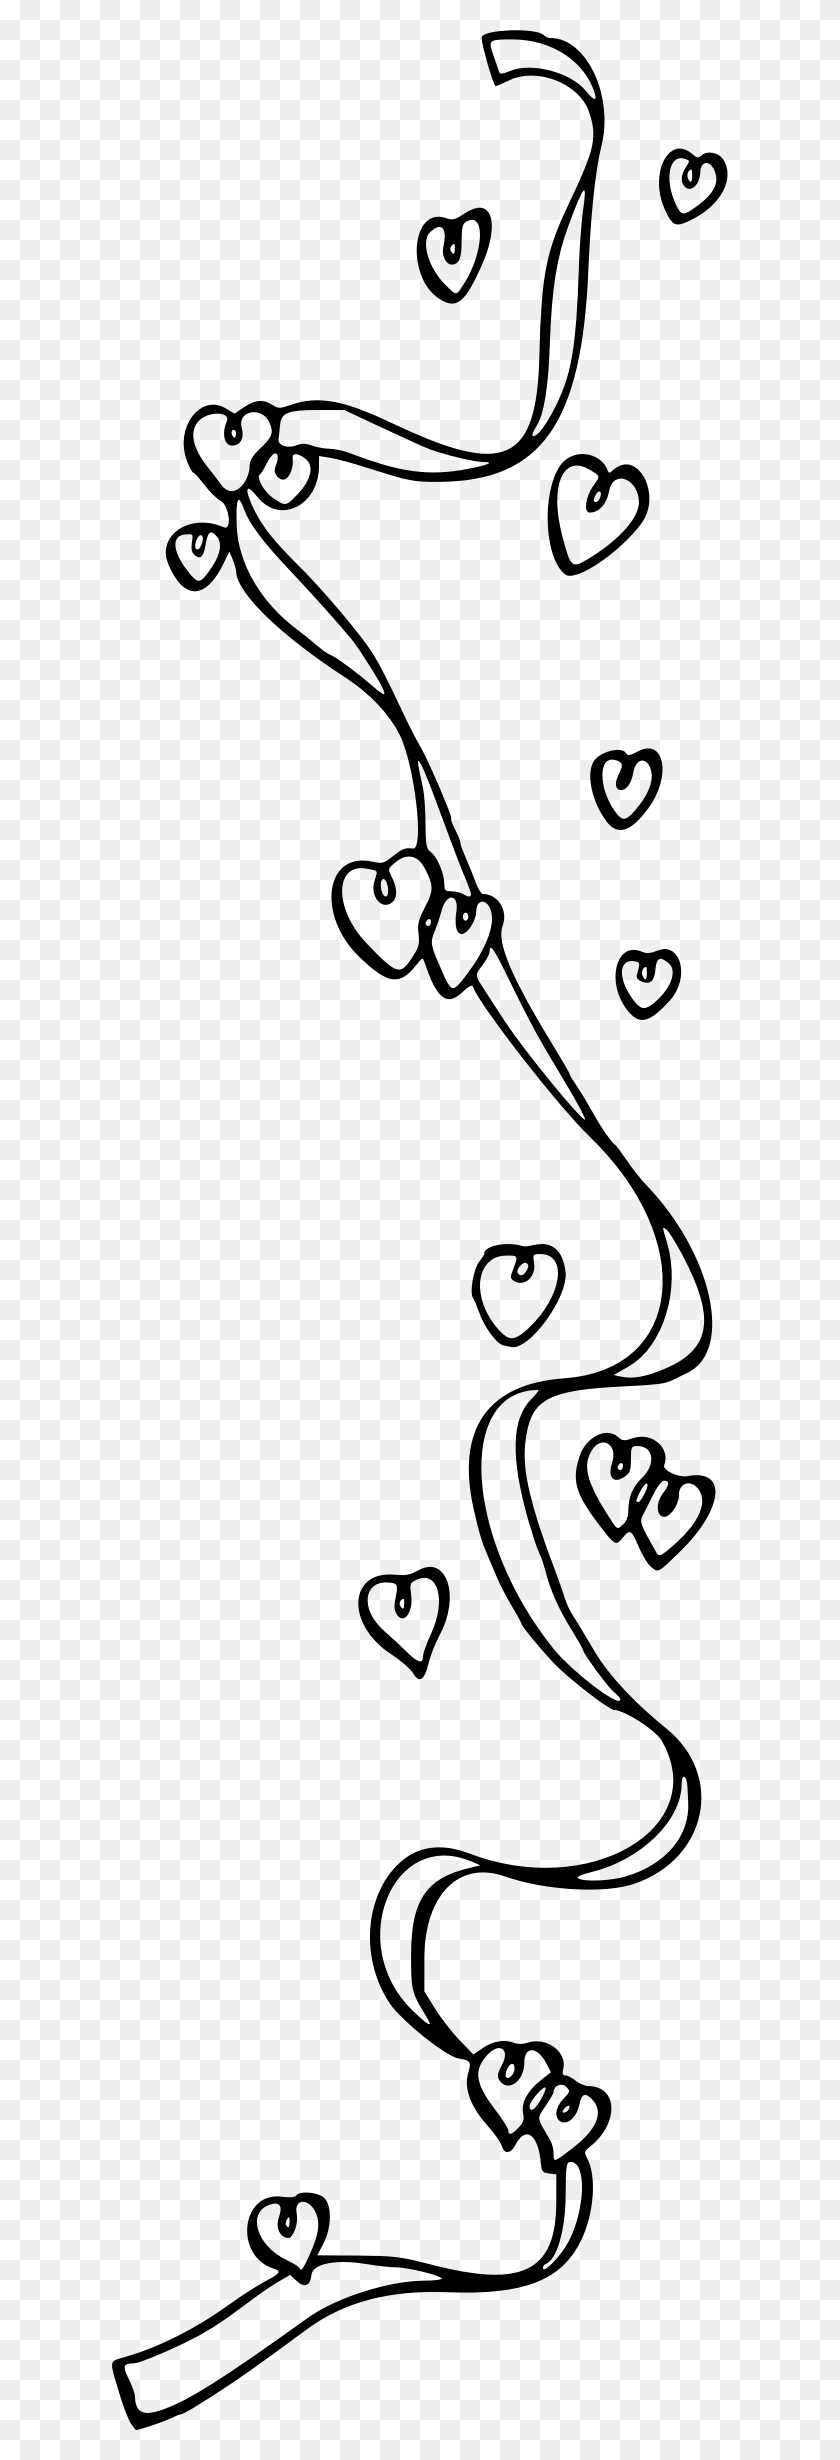 616x2400 This Free Icons Design Of Ribbon And Hearts 1 Line Art, Gray, World Of Warcraft Hd Png